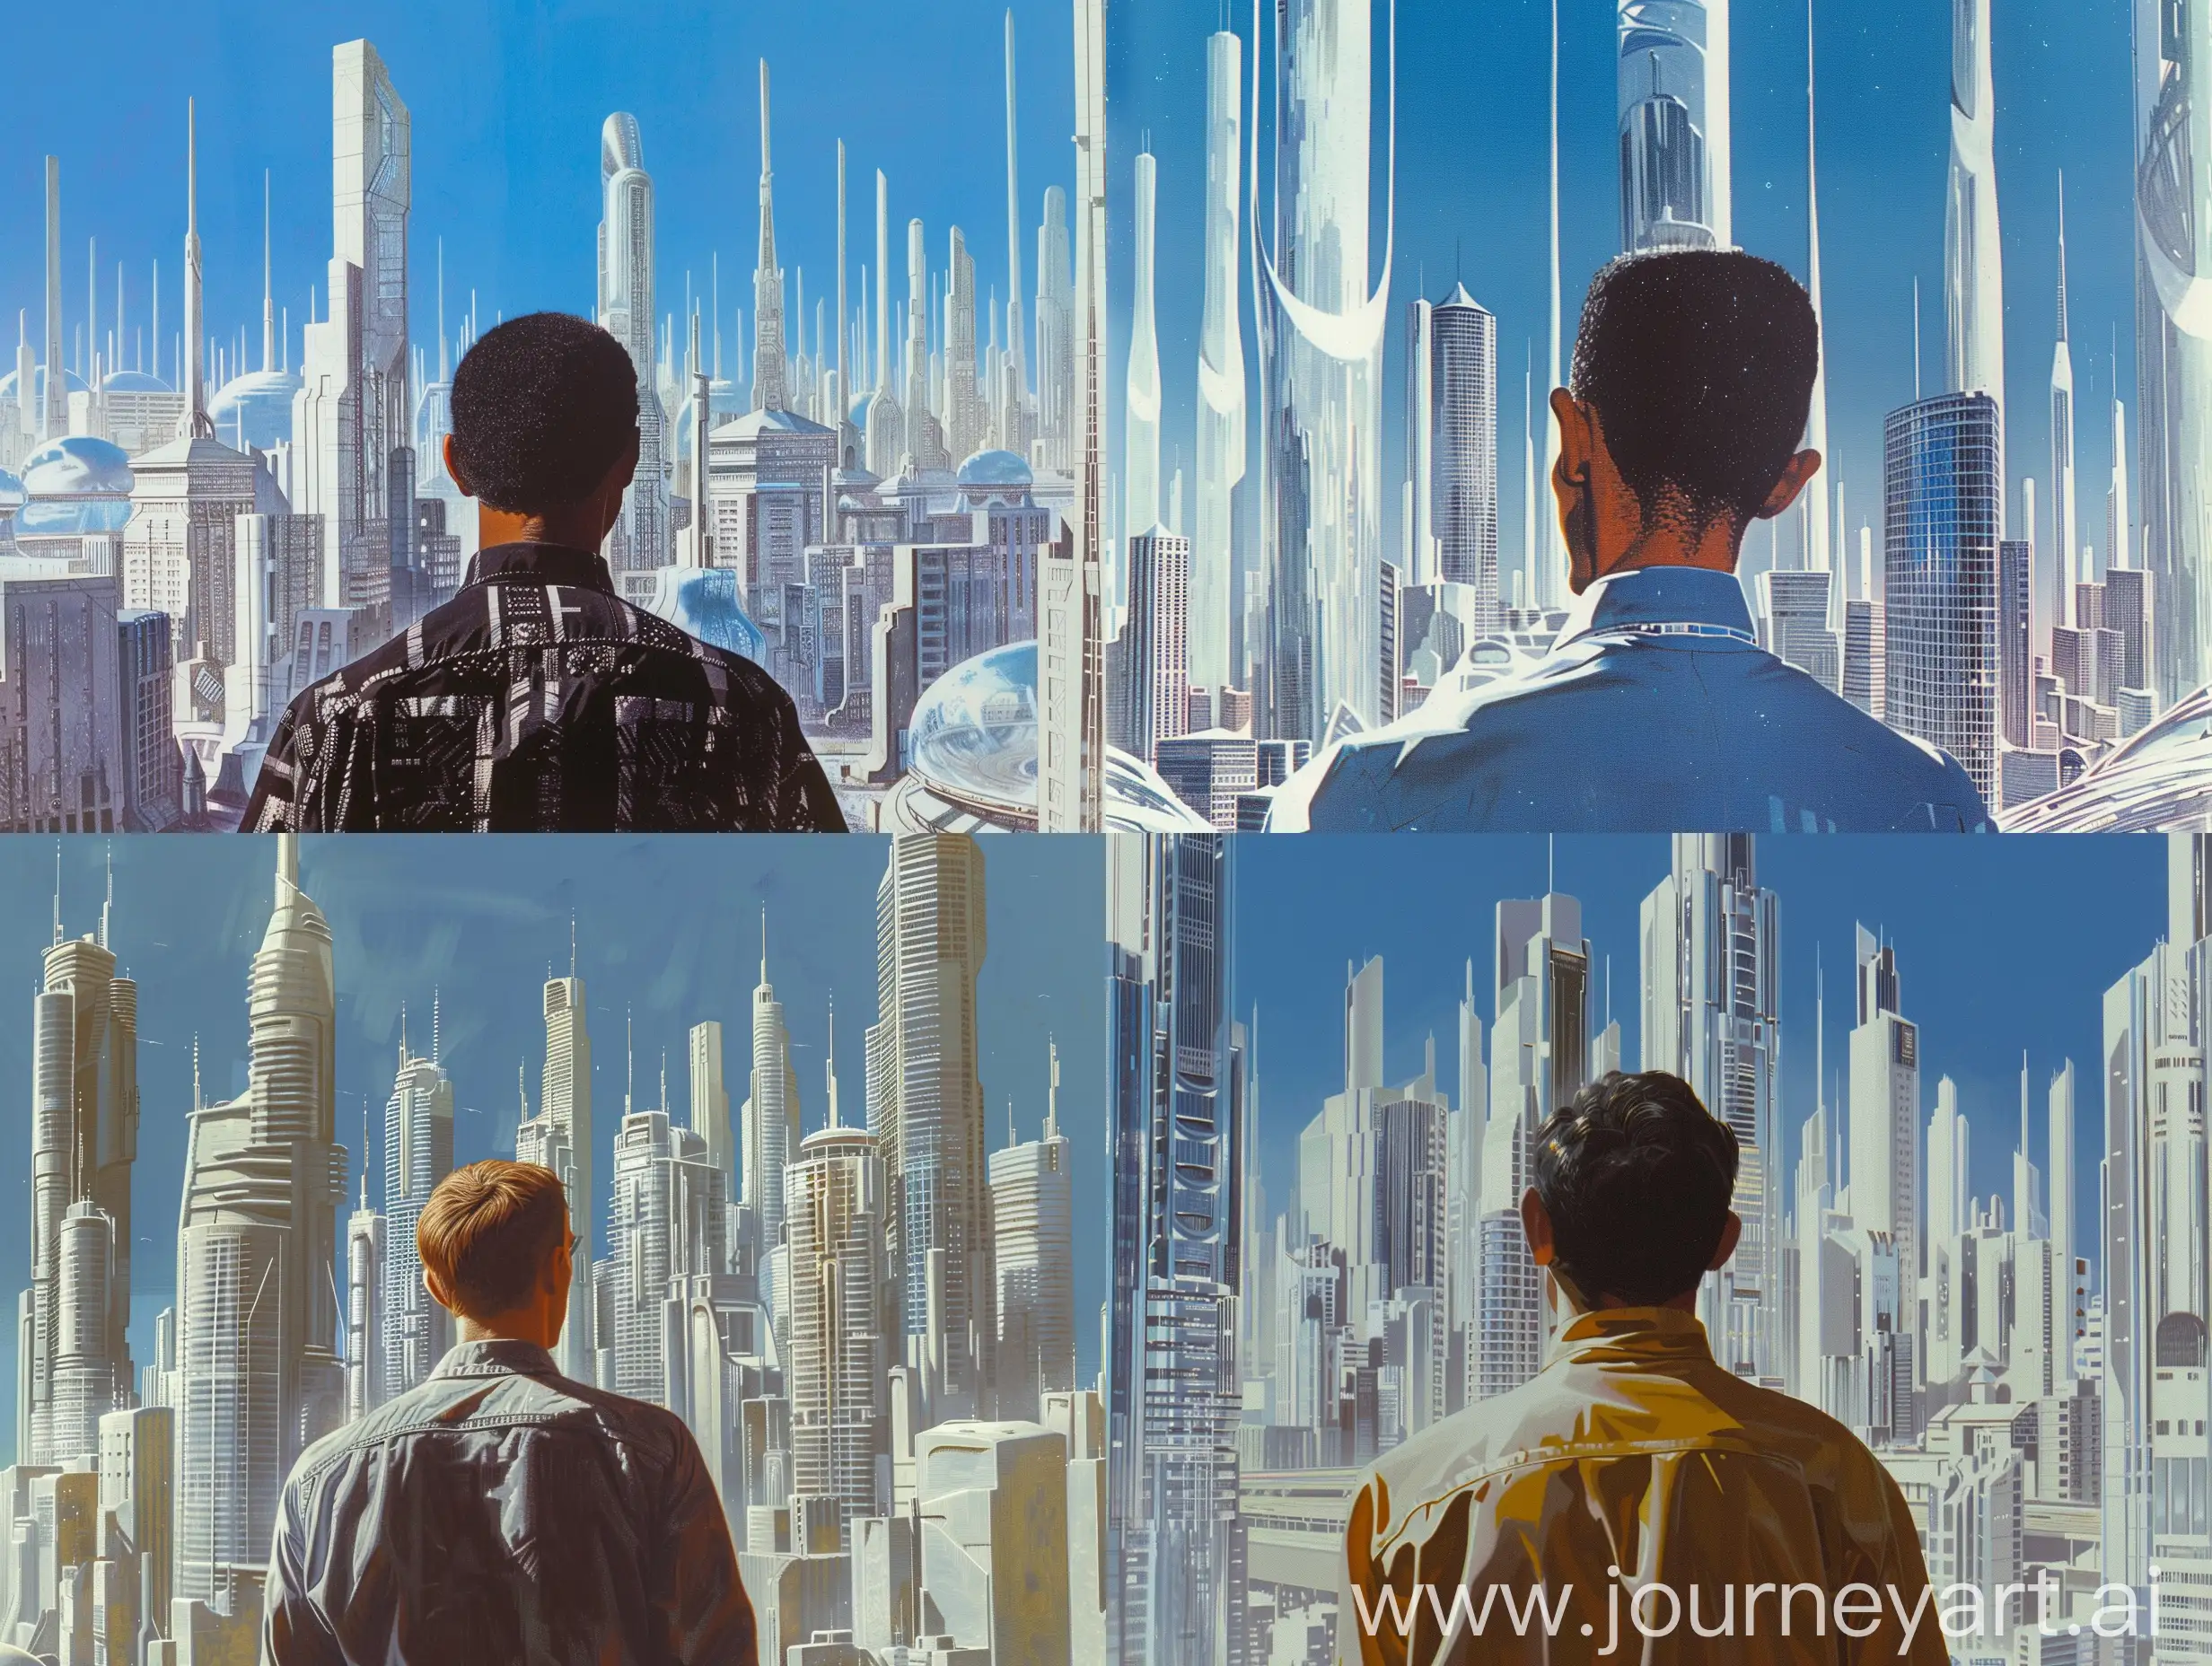 concept art of the back of man in the center looking resolutely at a futuristic city skyline of shimmering smooth silver and white skyscrapers and buildings. in 1970s retro science fiction art style. in color. blue sky.
